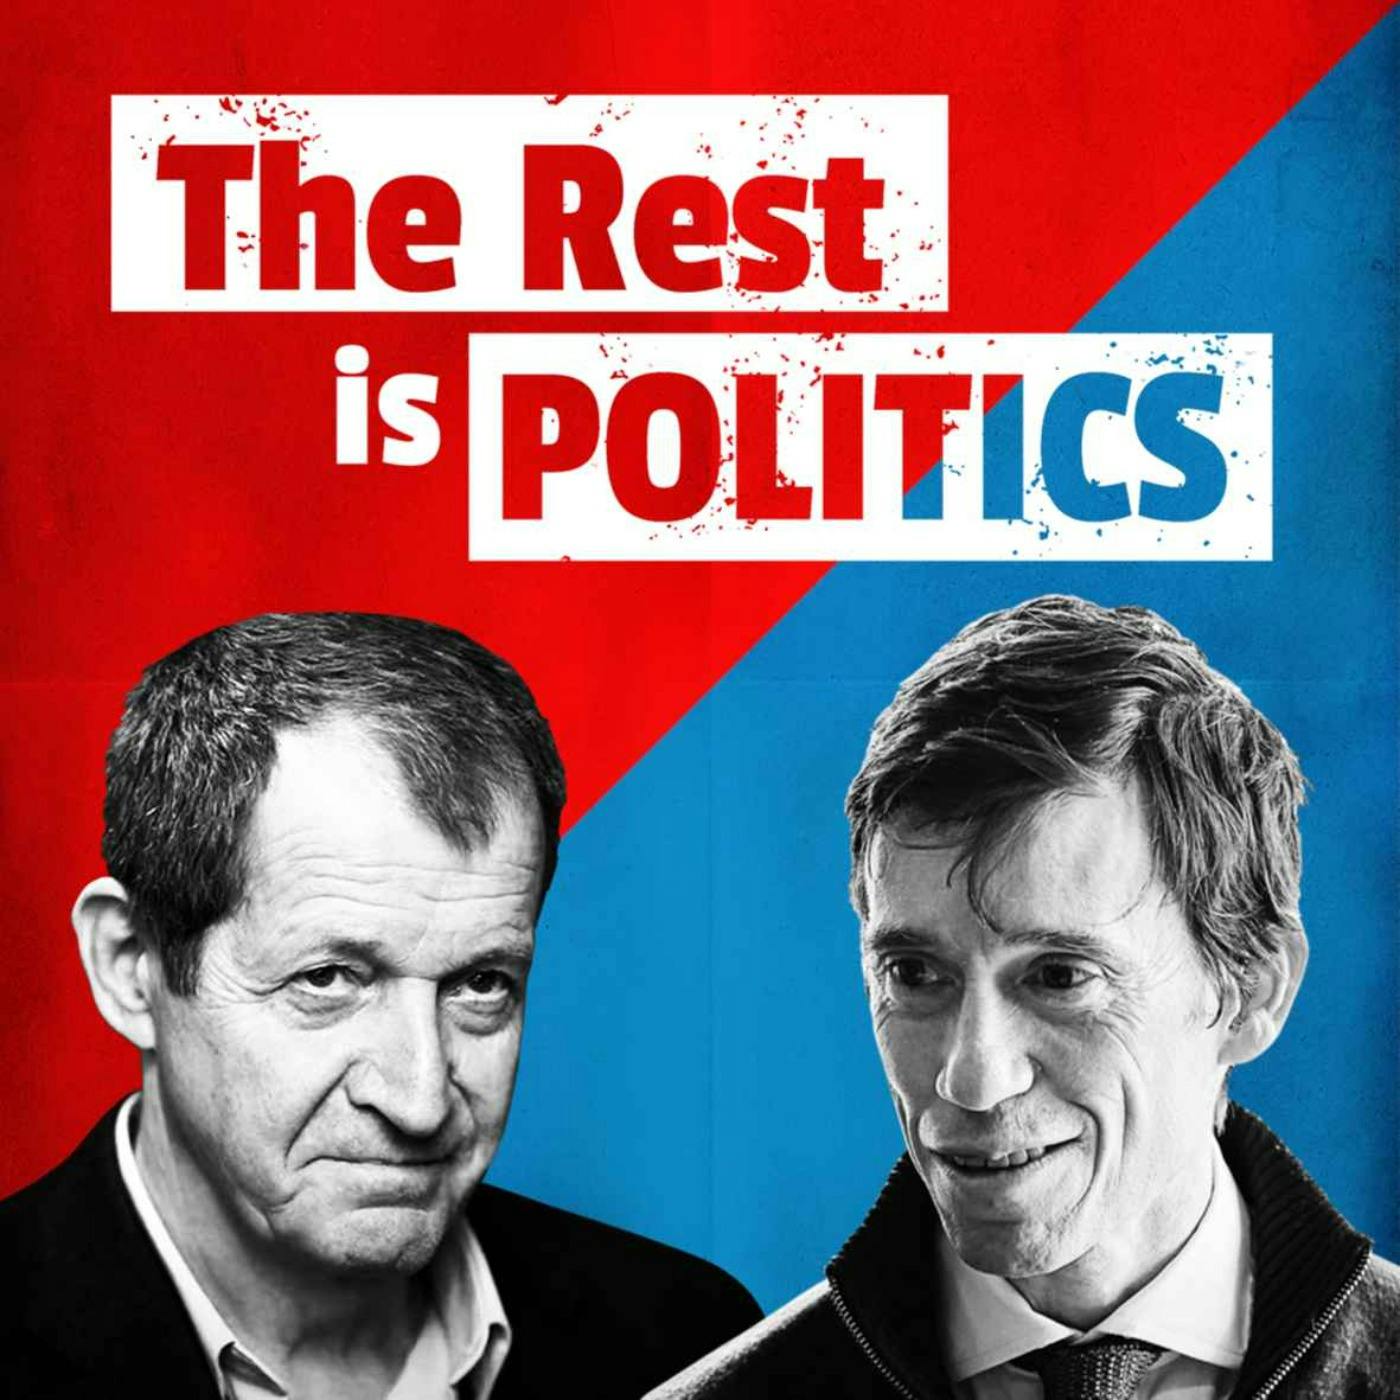 127. Question Time: Communists in Austria, the collapse of First Republic, and the political power of Ben and Jerry's